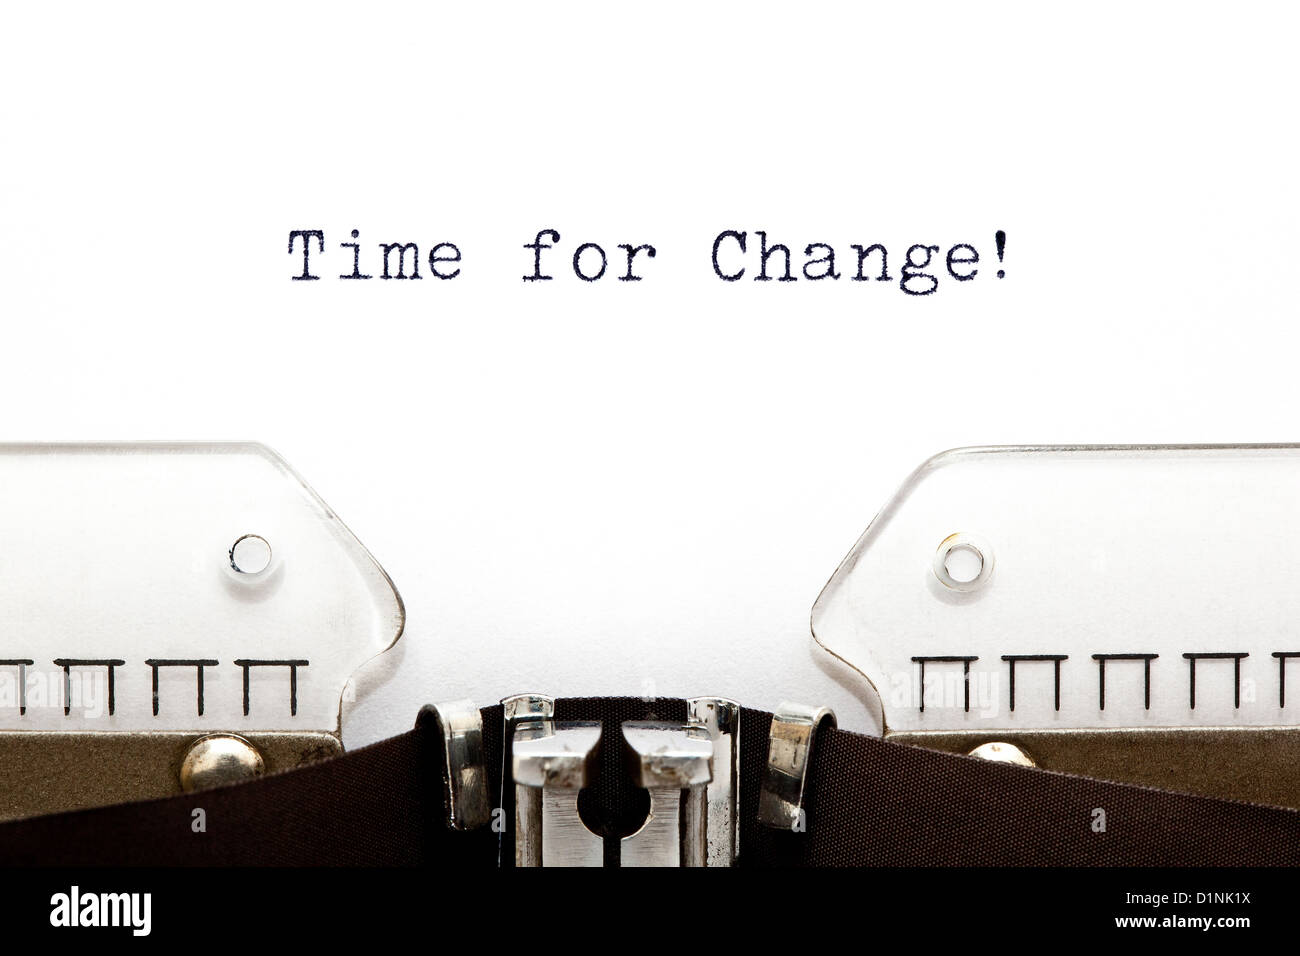 Time for Change printed on an old typewriter Stock Photo